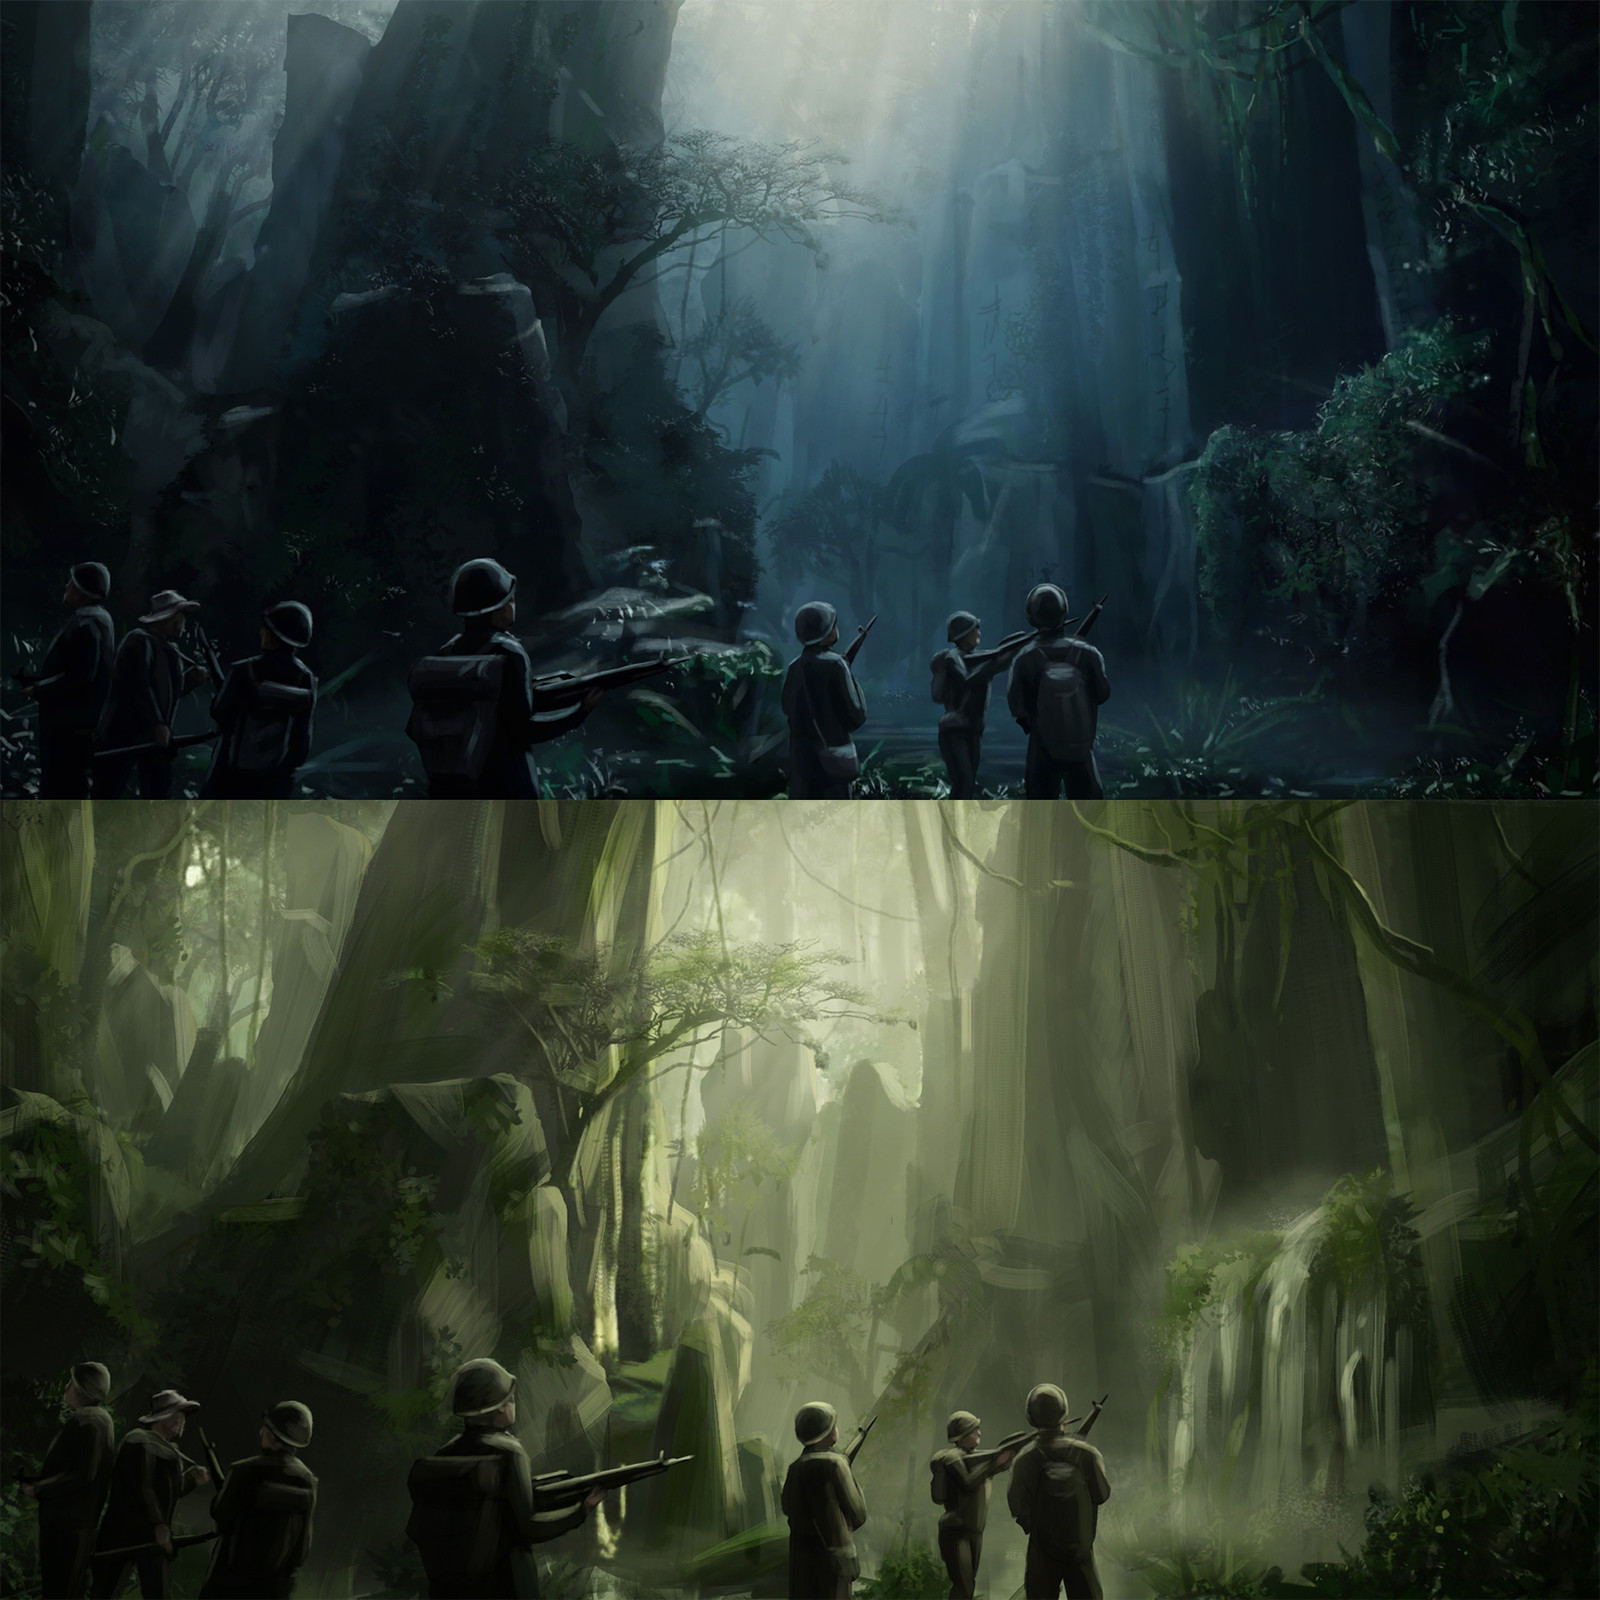 Two variations of the sketch with different cinematic light and colors